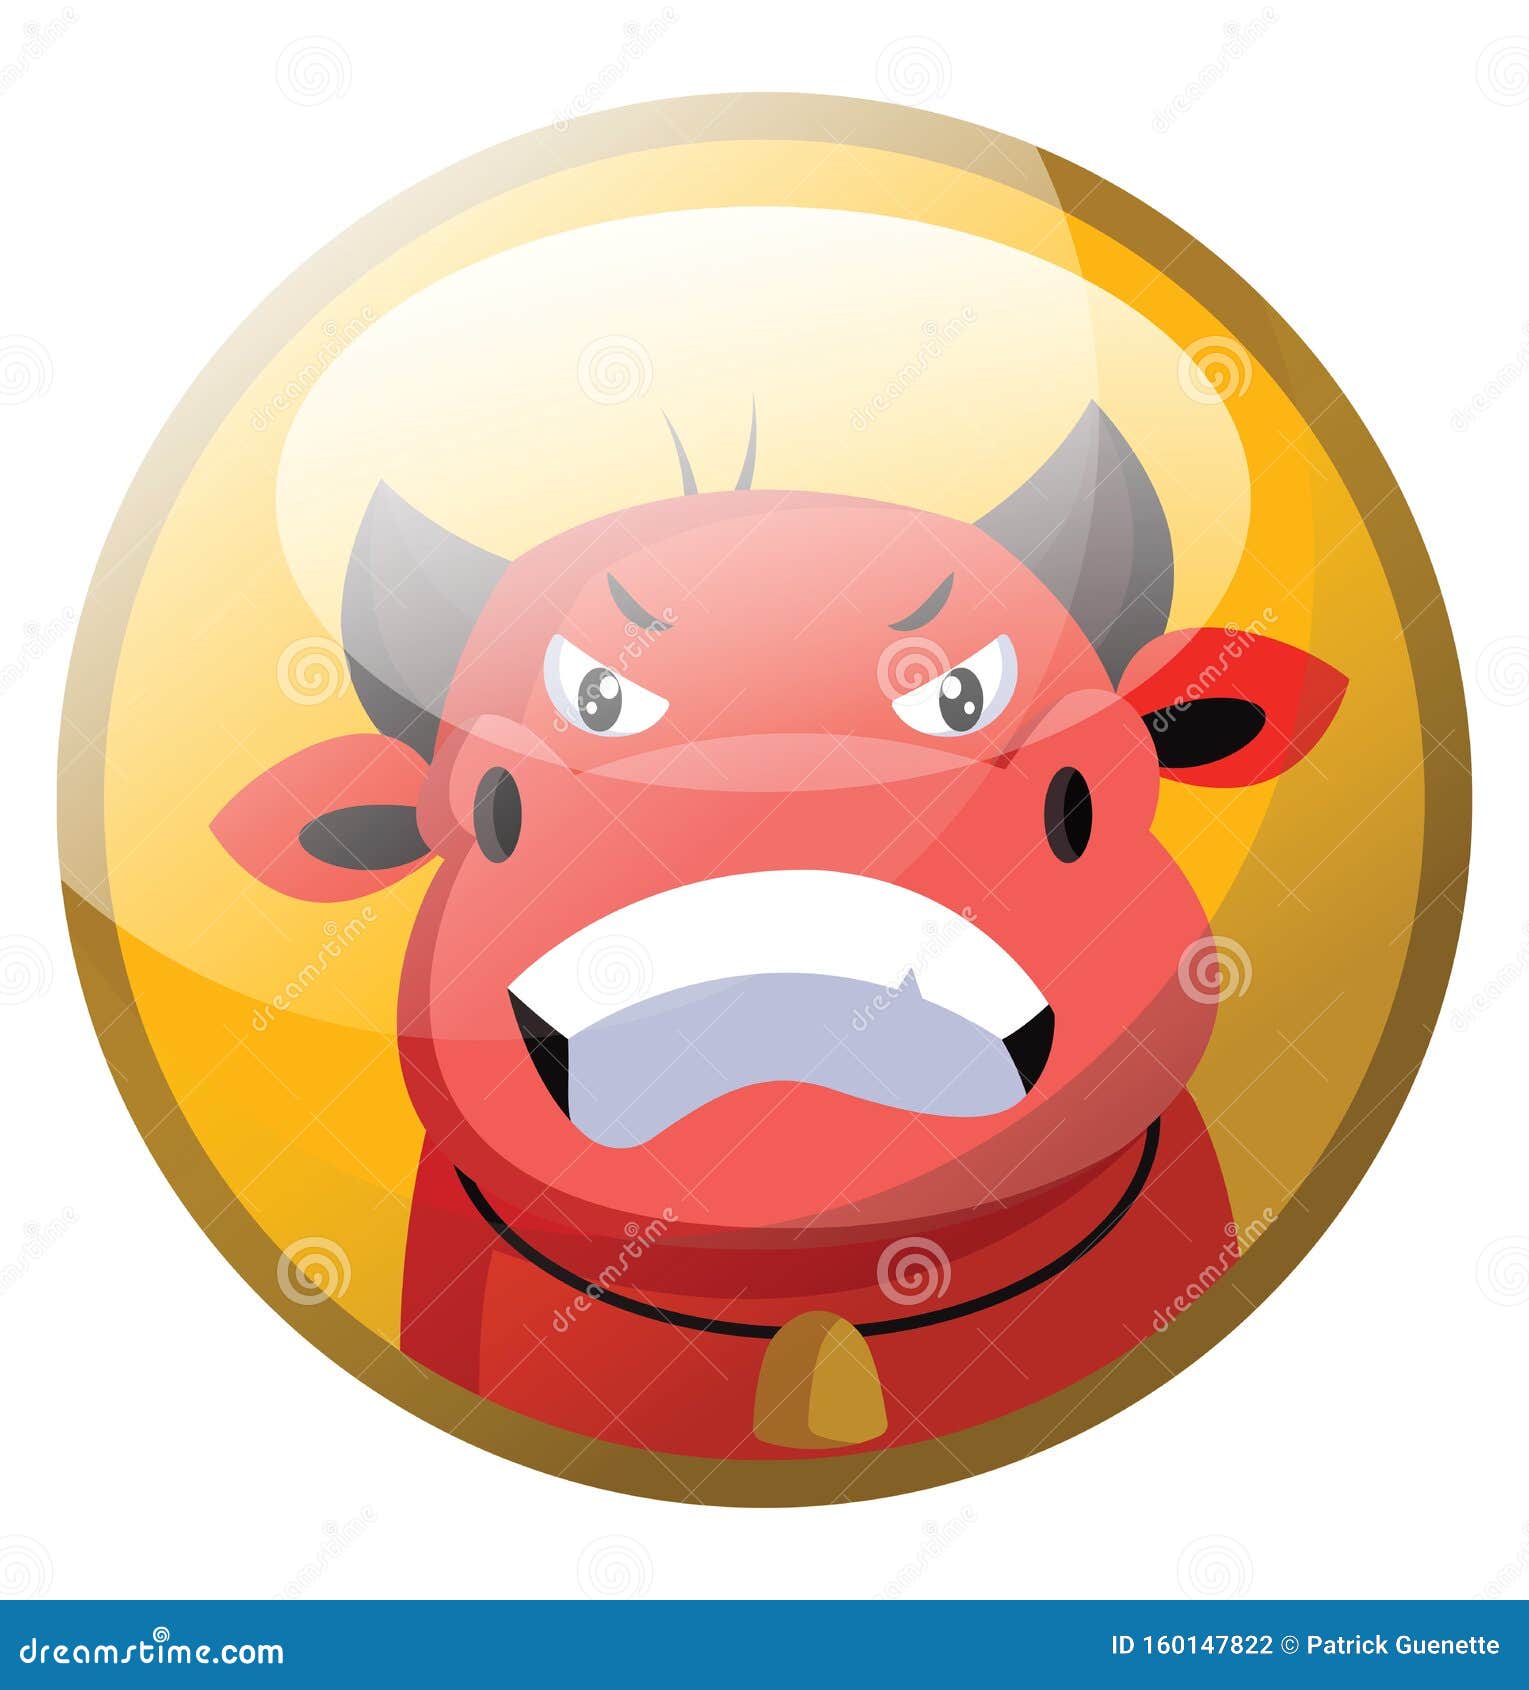 Cartoon Character of a Red Angry Bull Vector Illustration in Yellow Circle  Stock Vector - Illustration of angry, wild: 160147822